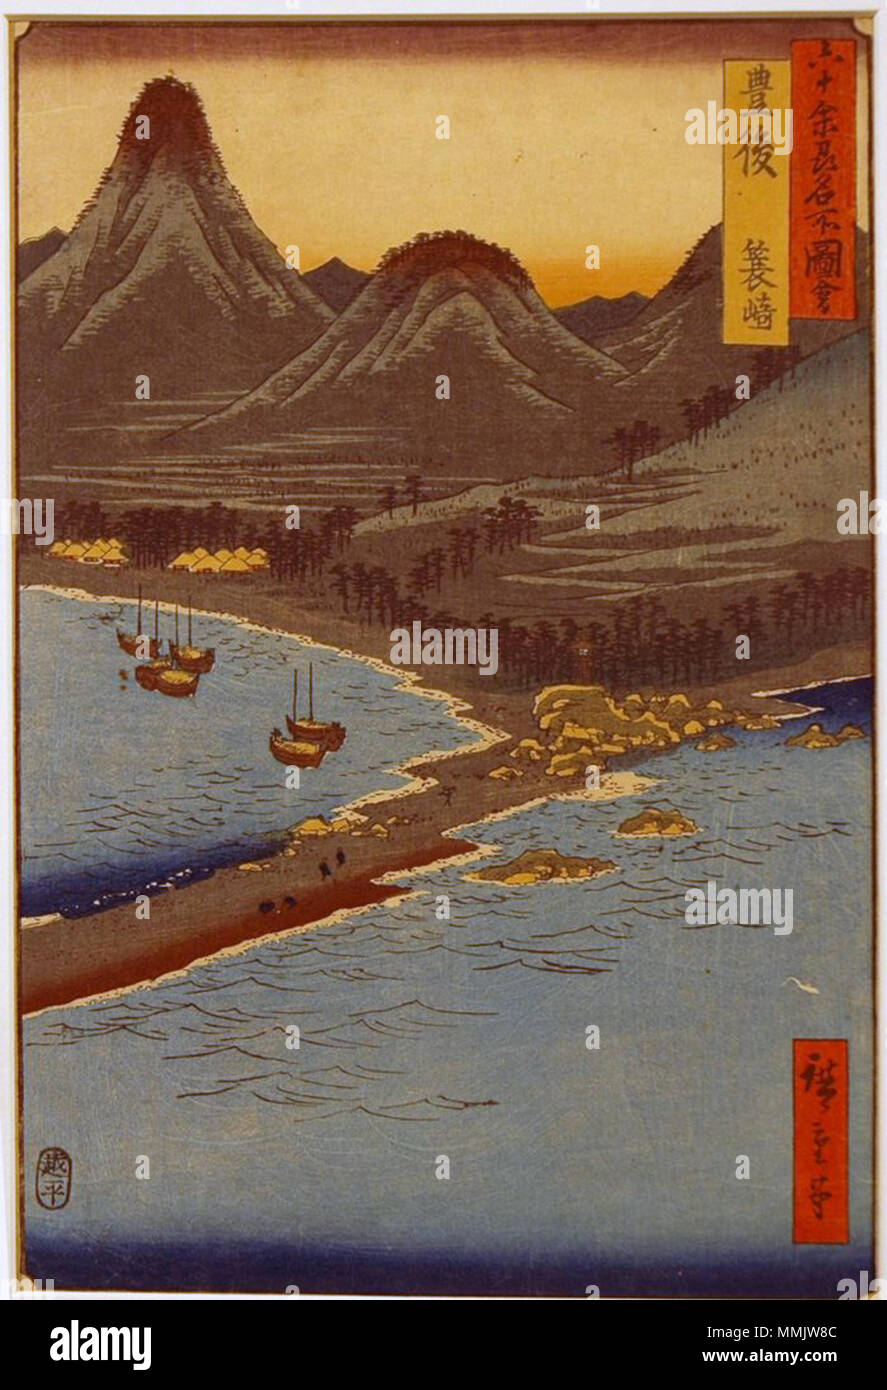 . English: Accession Number: 1957.294 Display Artist: Utagawa Hiroshige Display Title: 'Bungo Province, Minosaki' Translation(s): Minosaki Series Title: Famous Views of the Sixty-odd Provinces Suite Name: Rokujuyoshu meisho zue Creation Date: 1856 Medium: Woodblock Height: 13 3/8 in. Width: 8 15/16 in. Display Dimensions: 13 3/8 in. x 8 15/16 in. (33.97 cm x 22.7 cm) Publisher: Koshimuraya Heisuke Credit Line: Bequest of Mrs. Cora Timken Burnett Label Copy: 'One of Series: Rokuju ye Shin. Meisho dzu. ''Views of 60 or More Provinces''. Published by Koshei kei in 1853-1856. Included in this coll Stock Photo